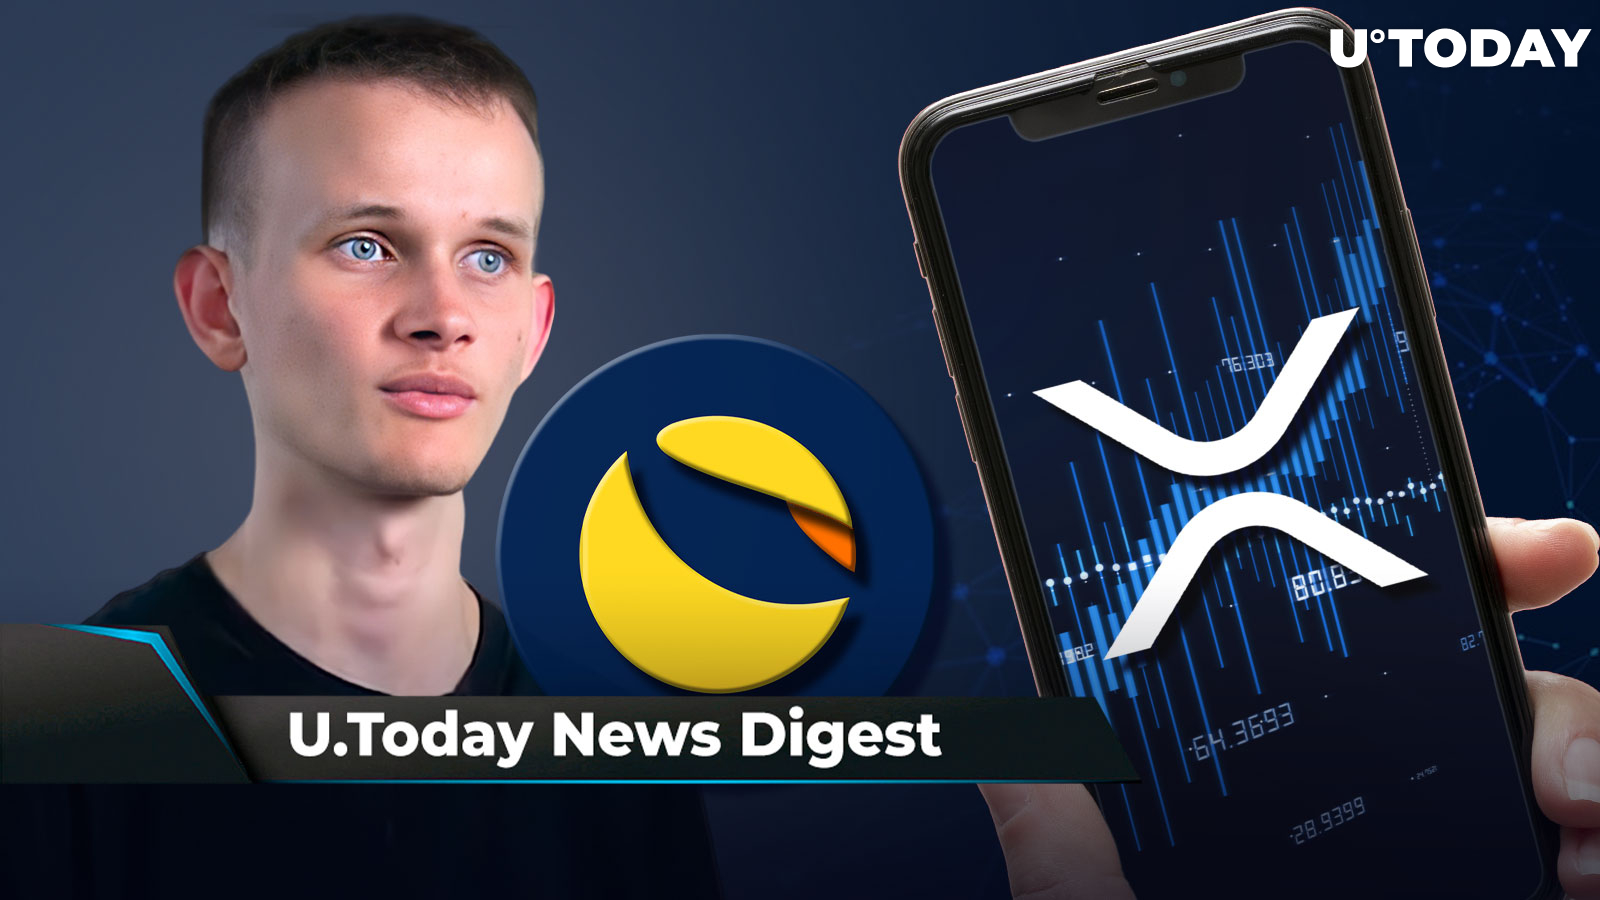 Shiba Eternity Announces “Download Day,” Vitalik Buterin Says Terra Luna Team Manipulated Market, XRP Trading Volumes up 542%: Crypto News Digest by U.Today